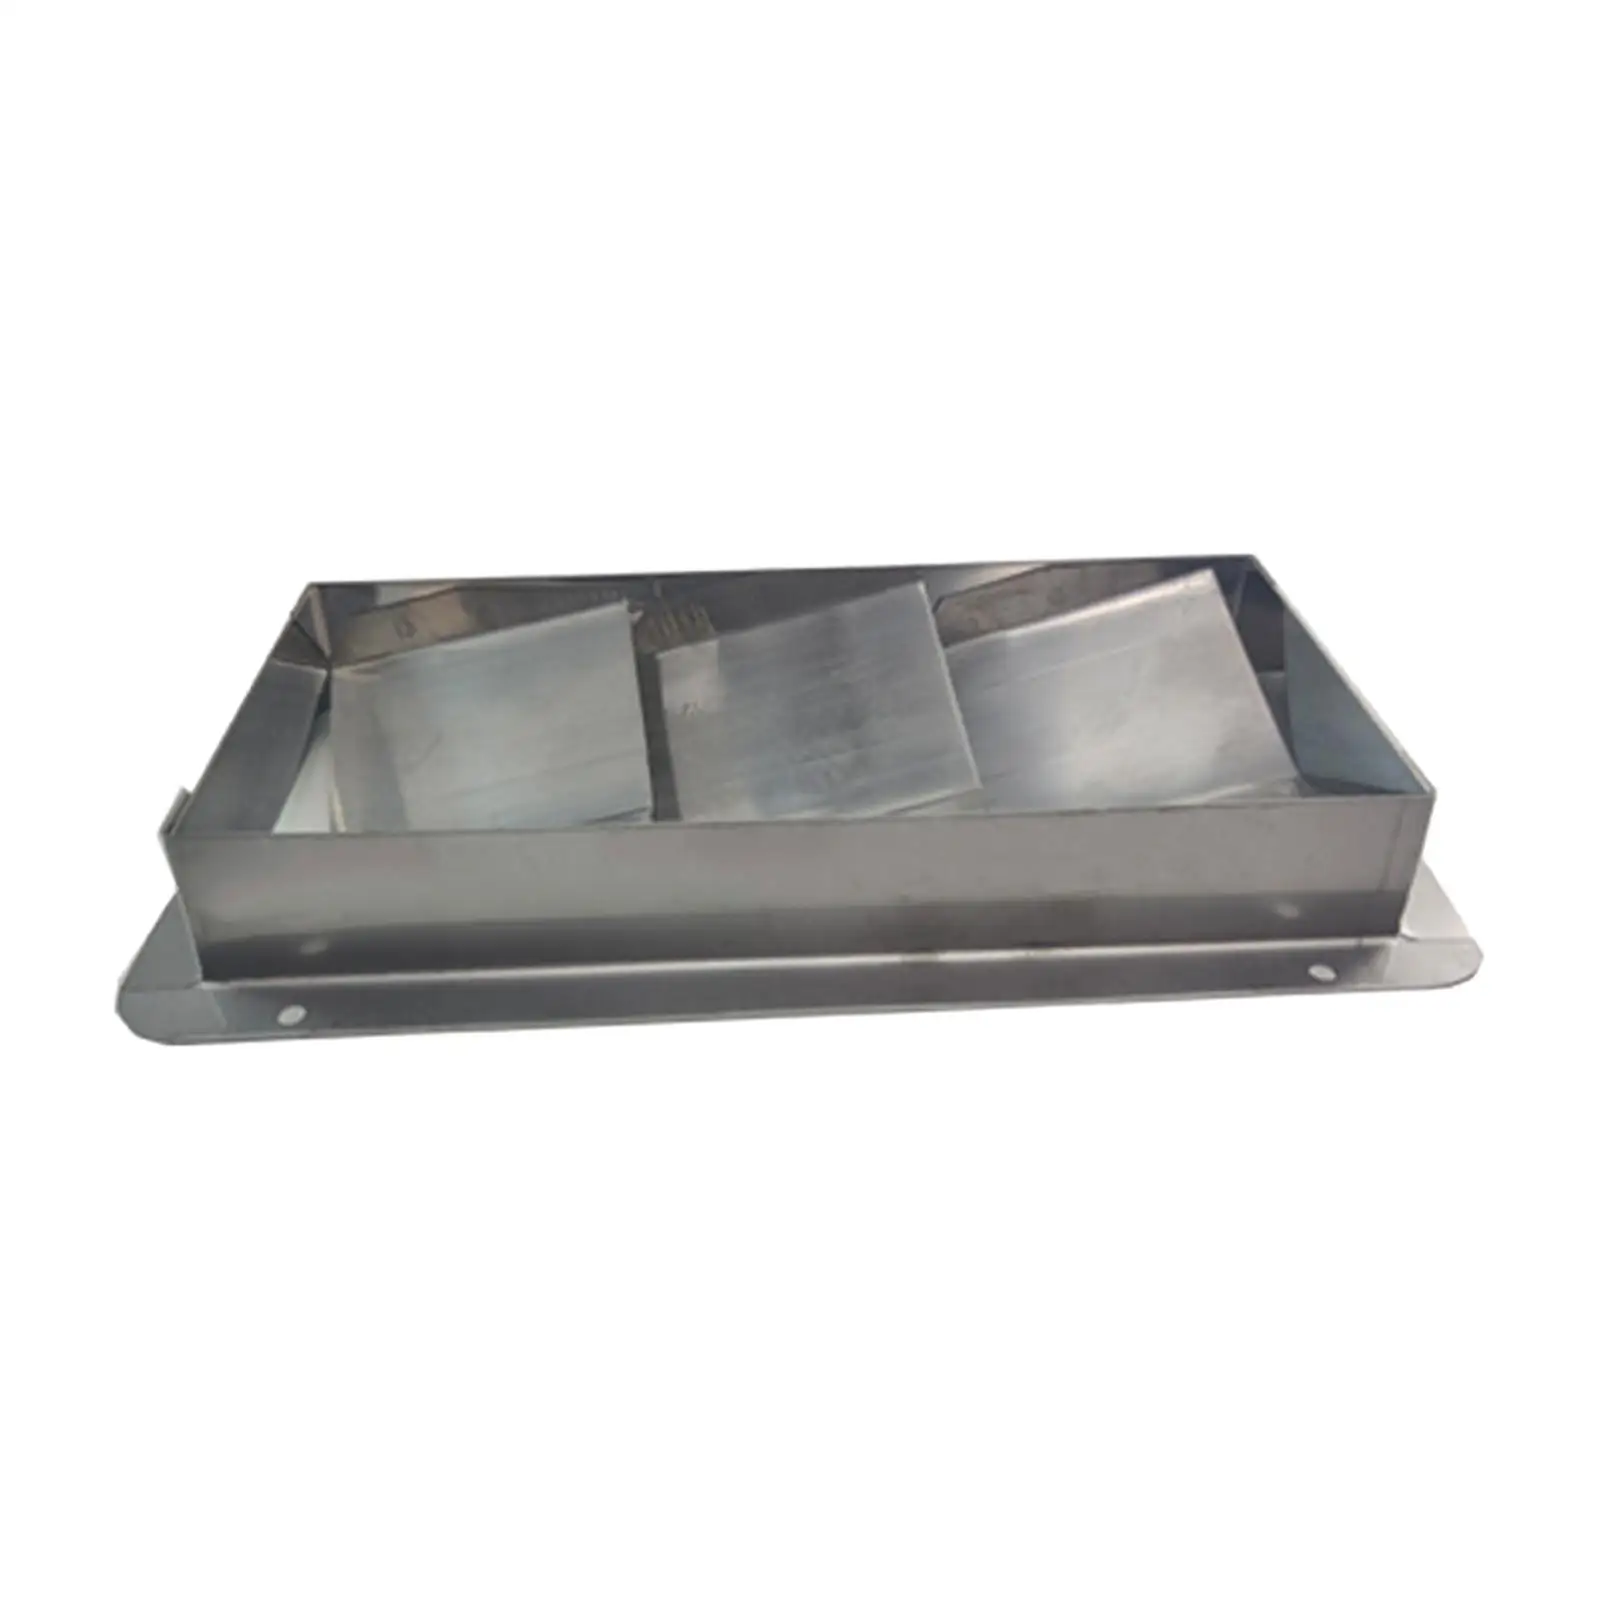 Marine Stainless Steel Louvered Vent Flush Mount Air Duct Vent Grill for Yachts Boats Ships Kayaks Caravans